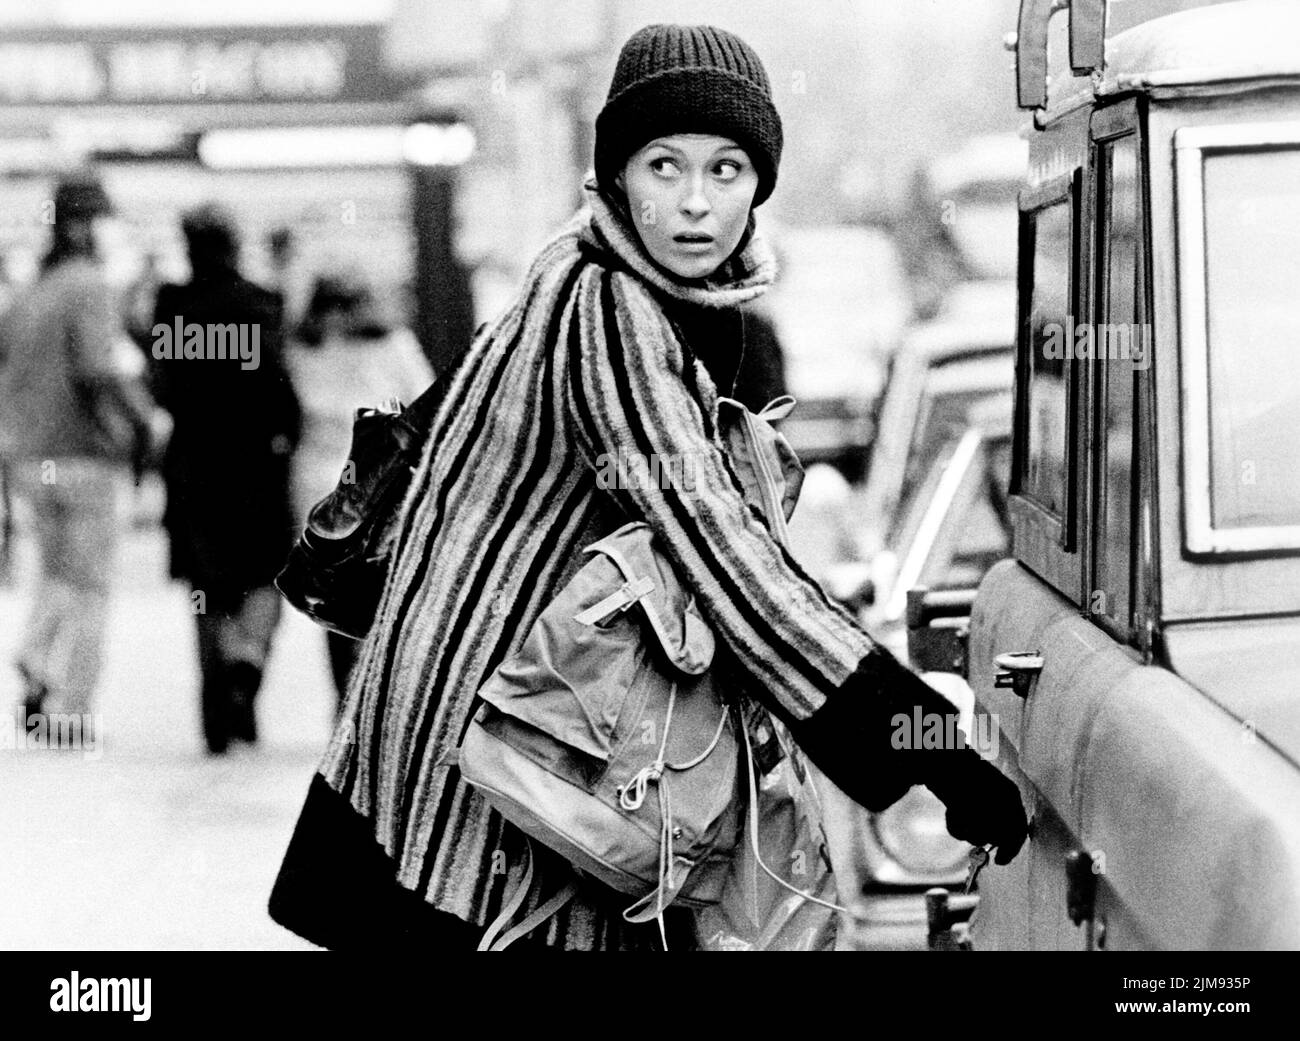 FAYE DUNAWAY in THREE DAYS OF THE CONDOR (1975), directed by SYDNEY POLLACK. Credit: PARAMOUNT PICTURES / Album Stock Photo